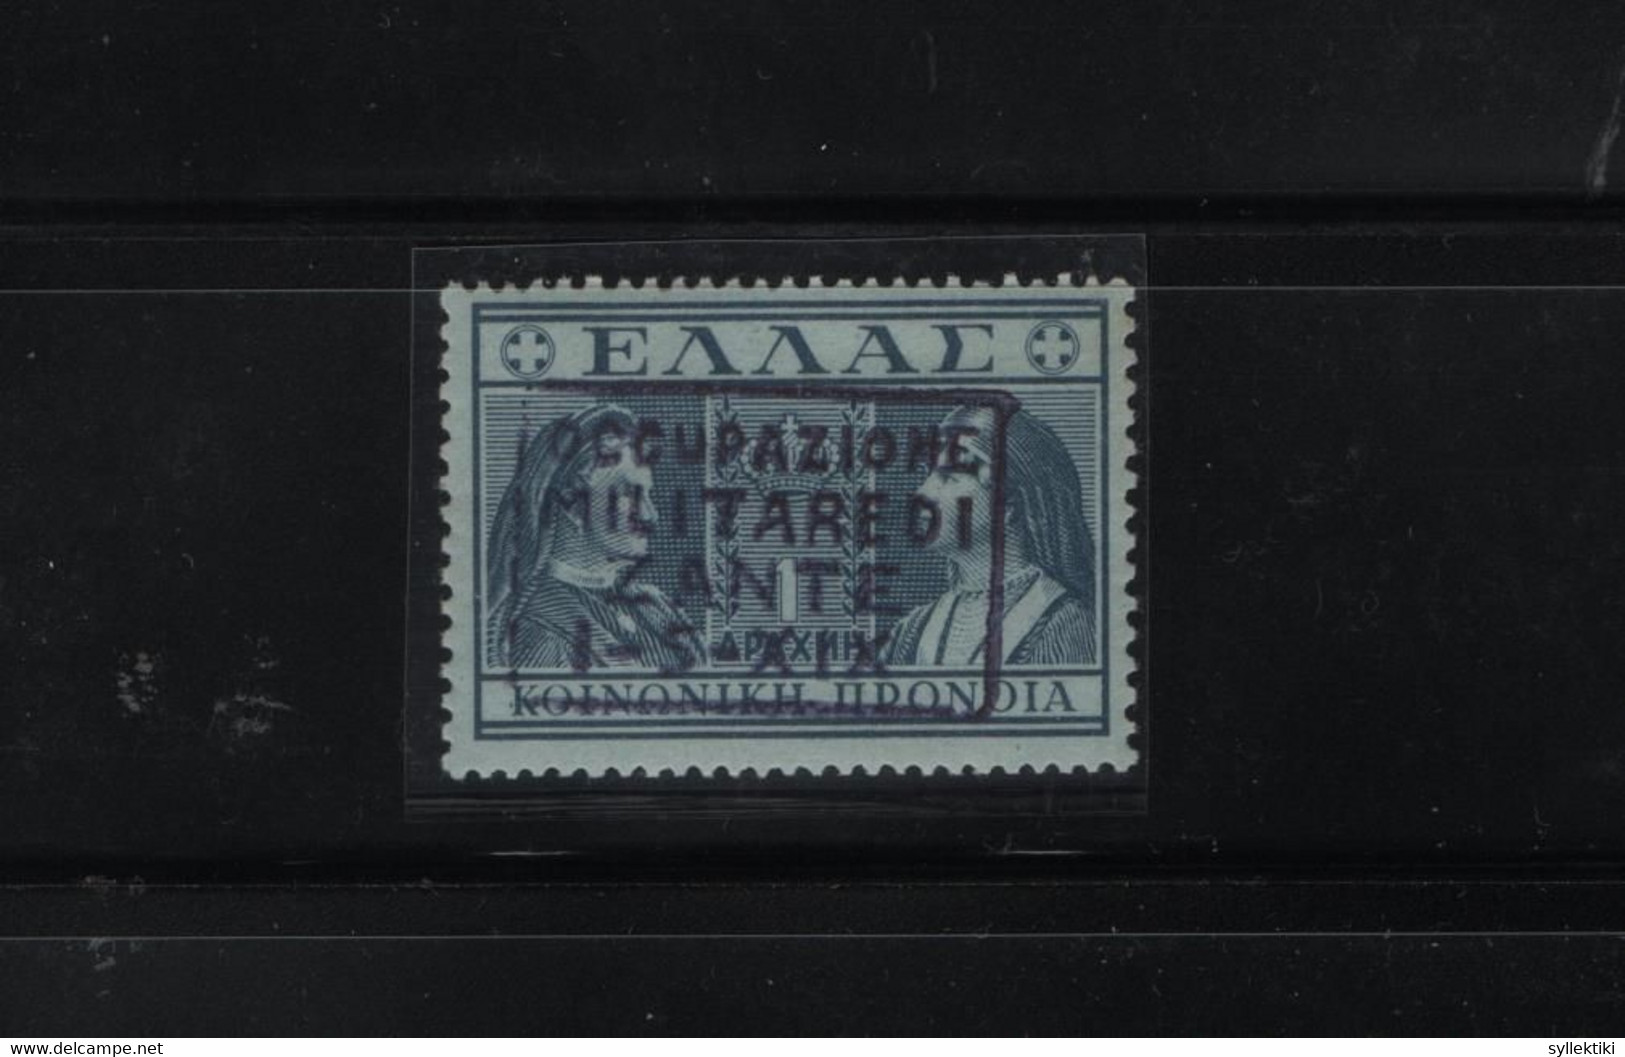 GREECE 1941 ZANTE OVERPRINT ON CHARITY ISSUE 1 DRACHMA MNH STAMP     HELLAS No 306 AND VALUE  EURO 900.00++ - Ionische Inseln